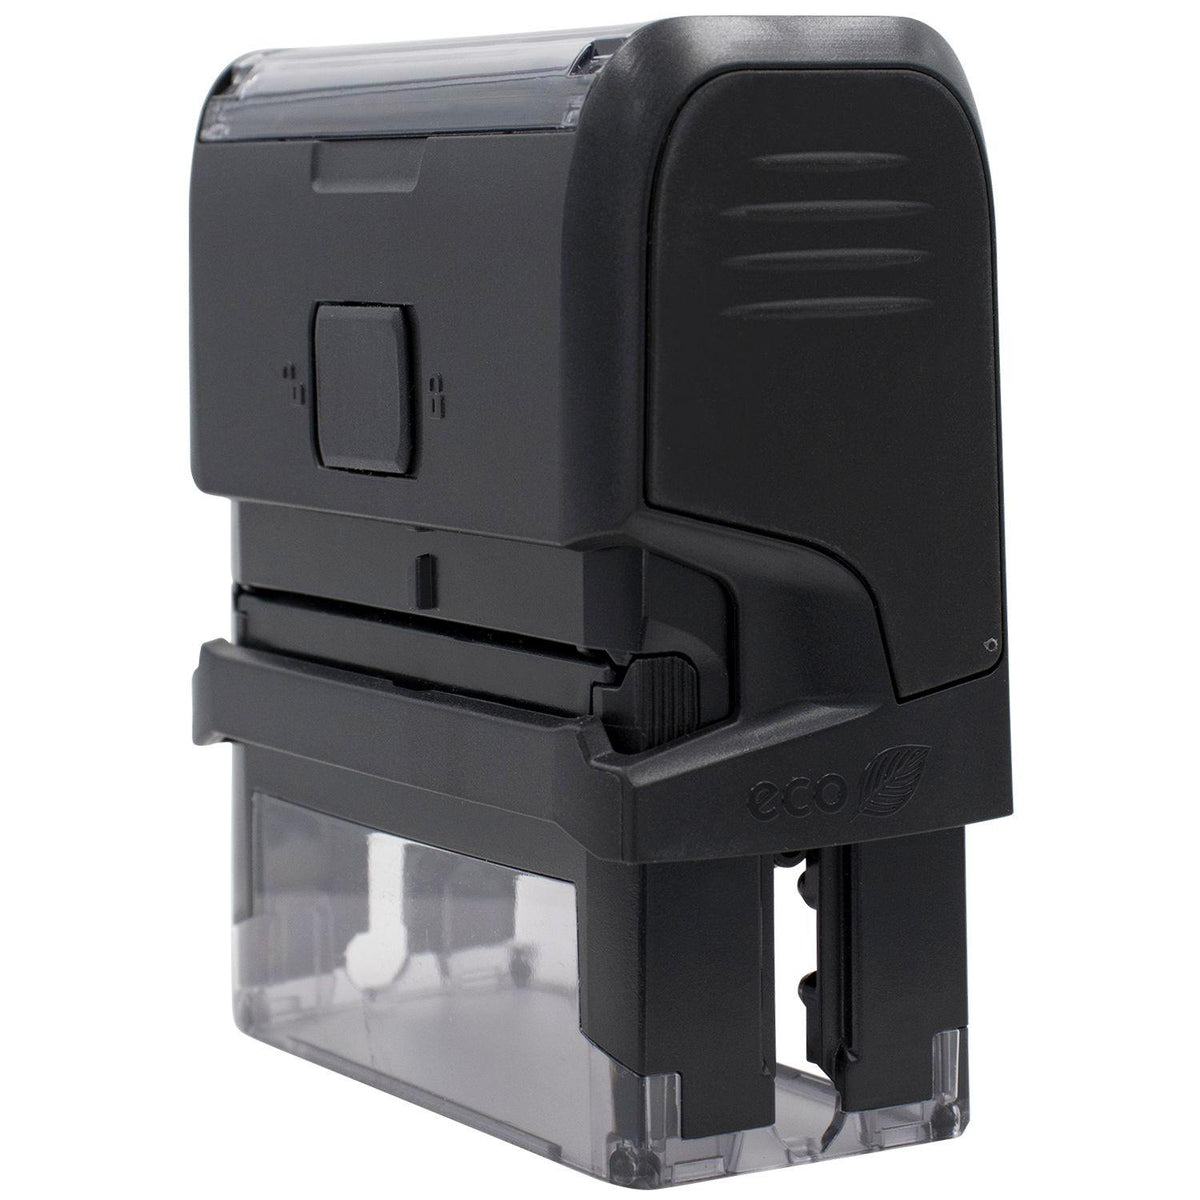 Self-Inking Anulado Stamp - Engineer Seal Stamps - Brand_Trodat, Impression Size_Small, Stamp Type_Self-Inking Stamp, Type of Use_Finance, Type of Use_Office